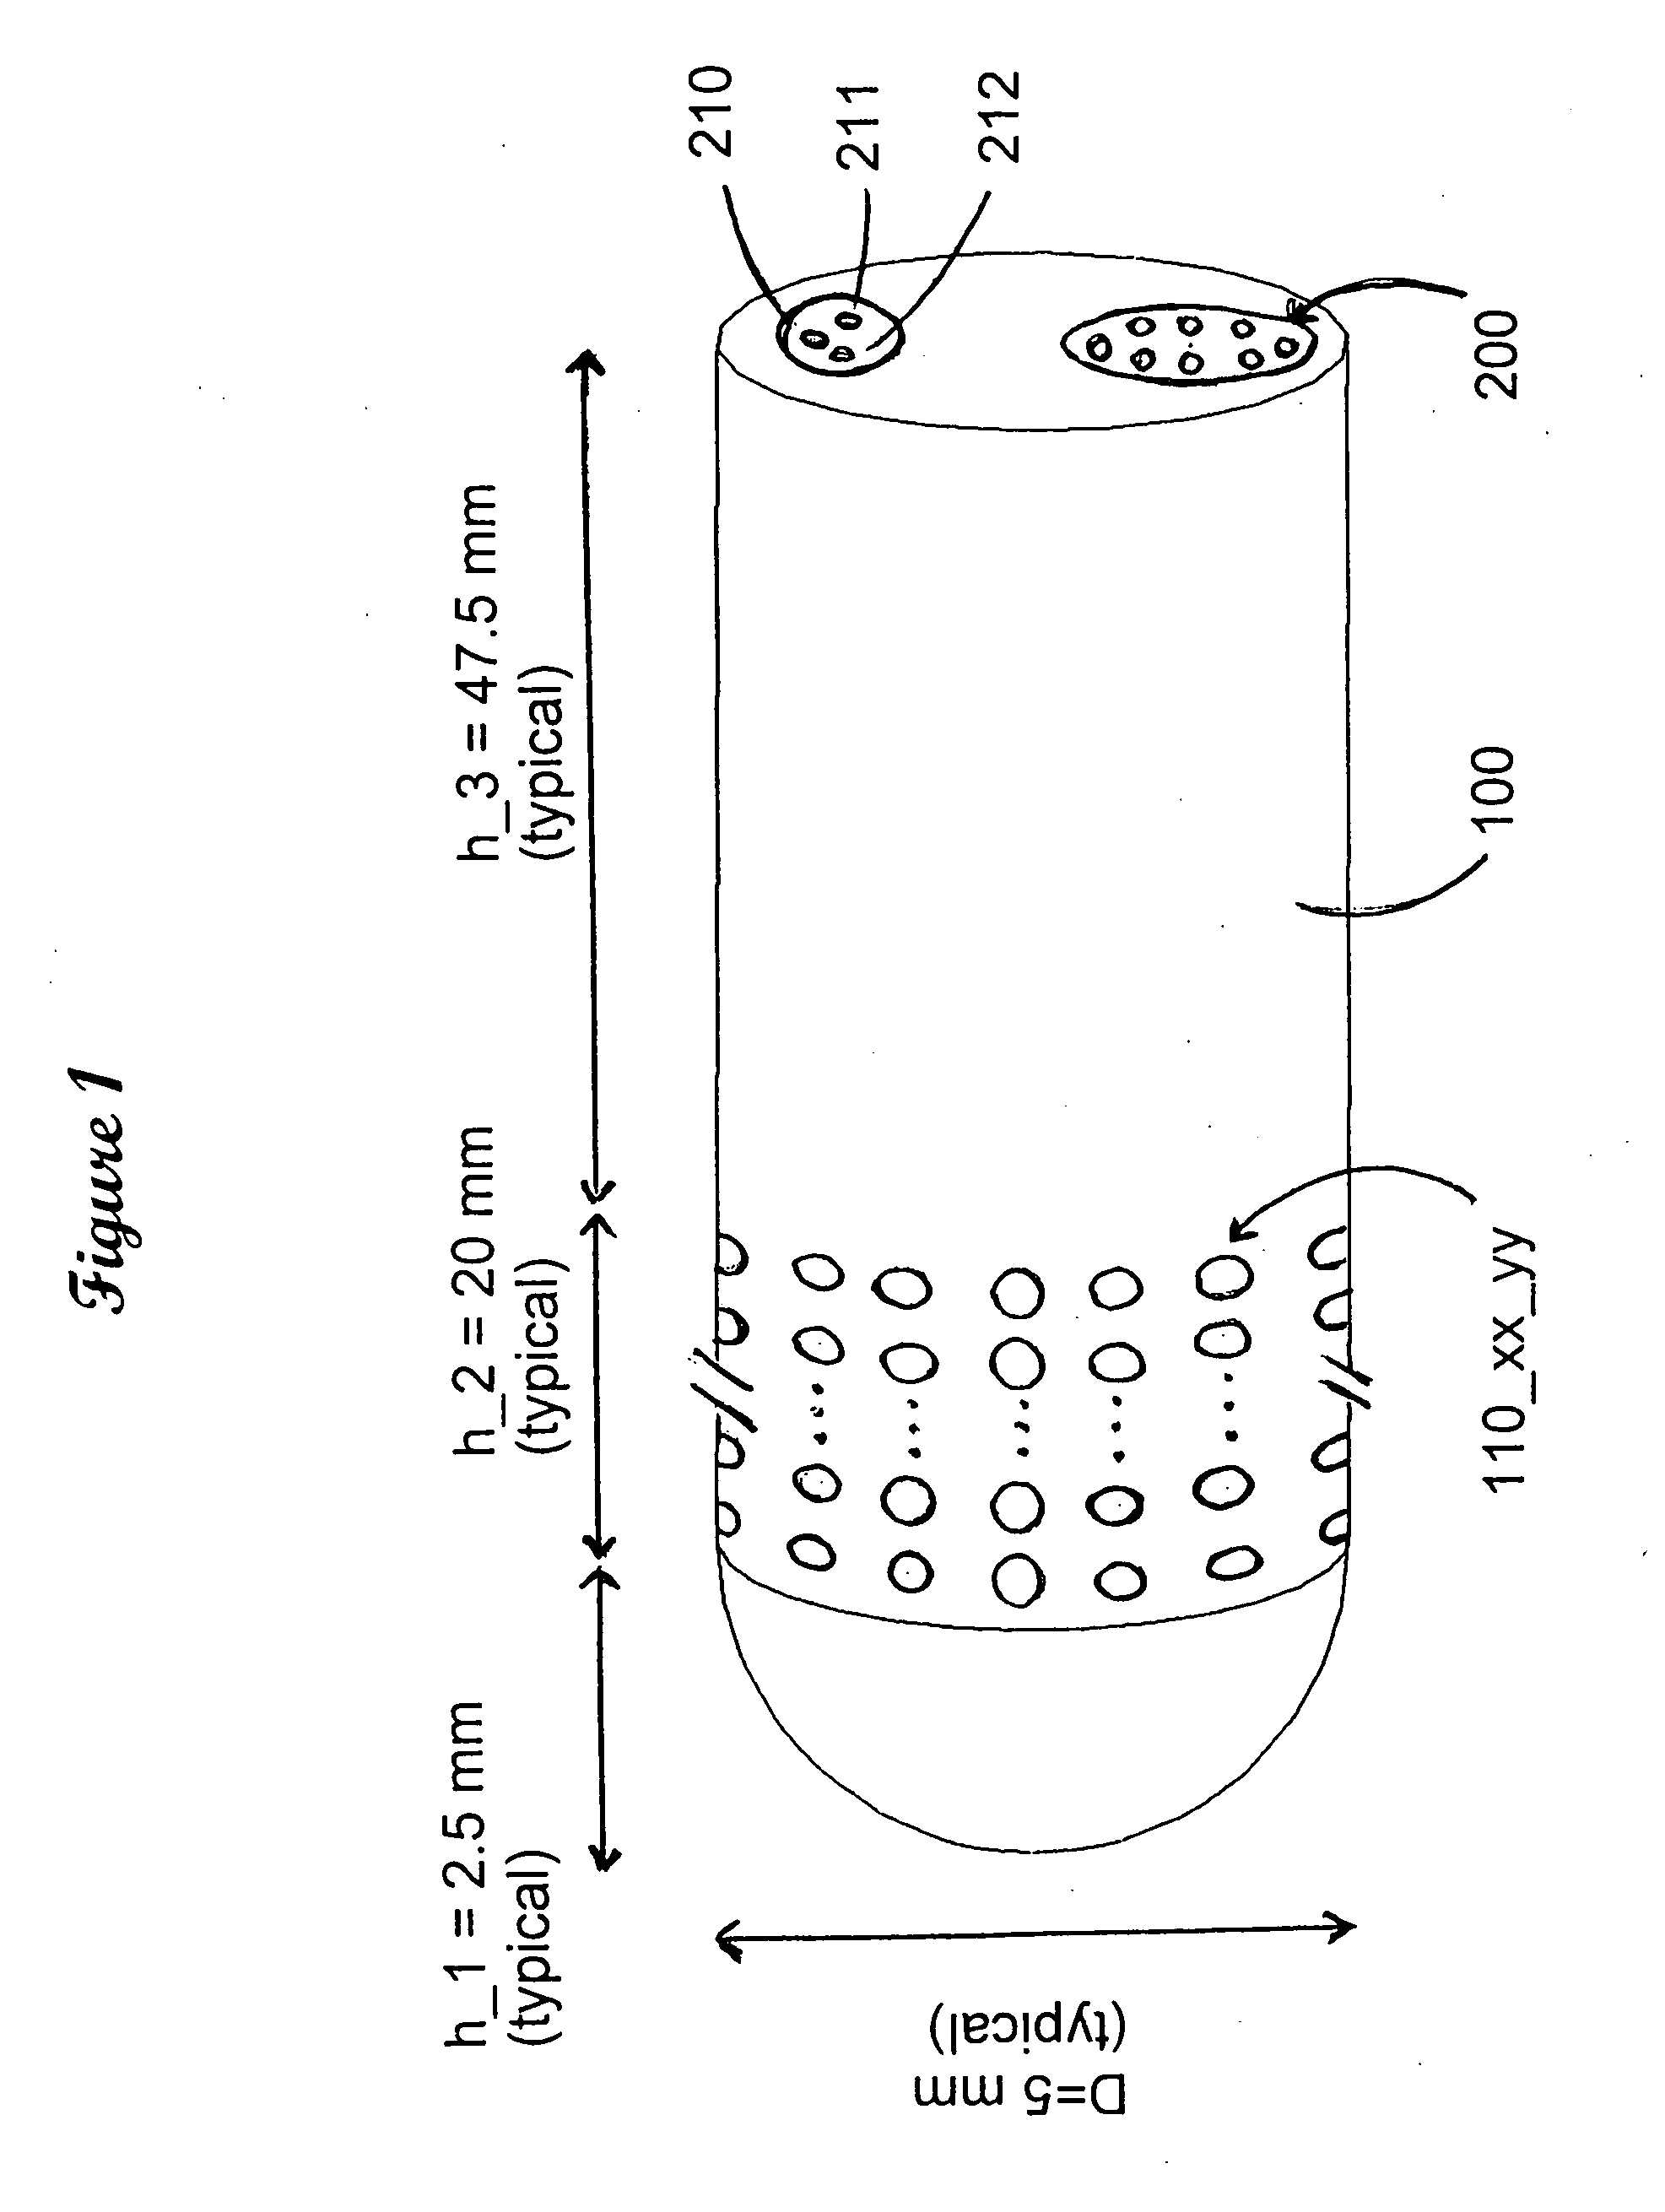 Method and means for connecting and controlling a large number of contacts for electrical cell stimulation in living organisms